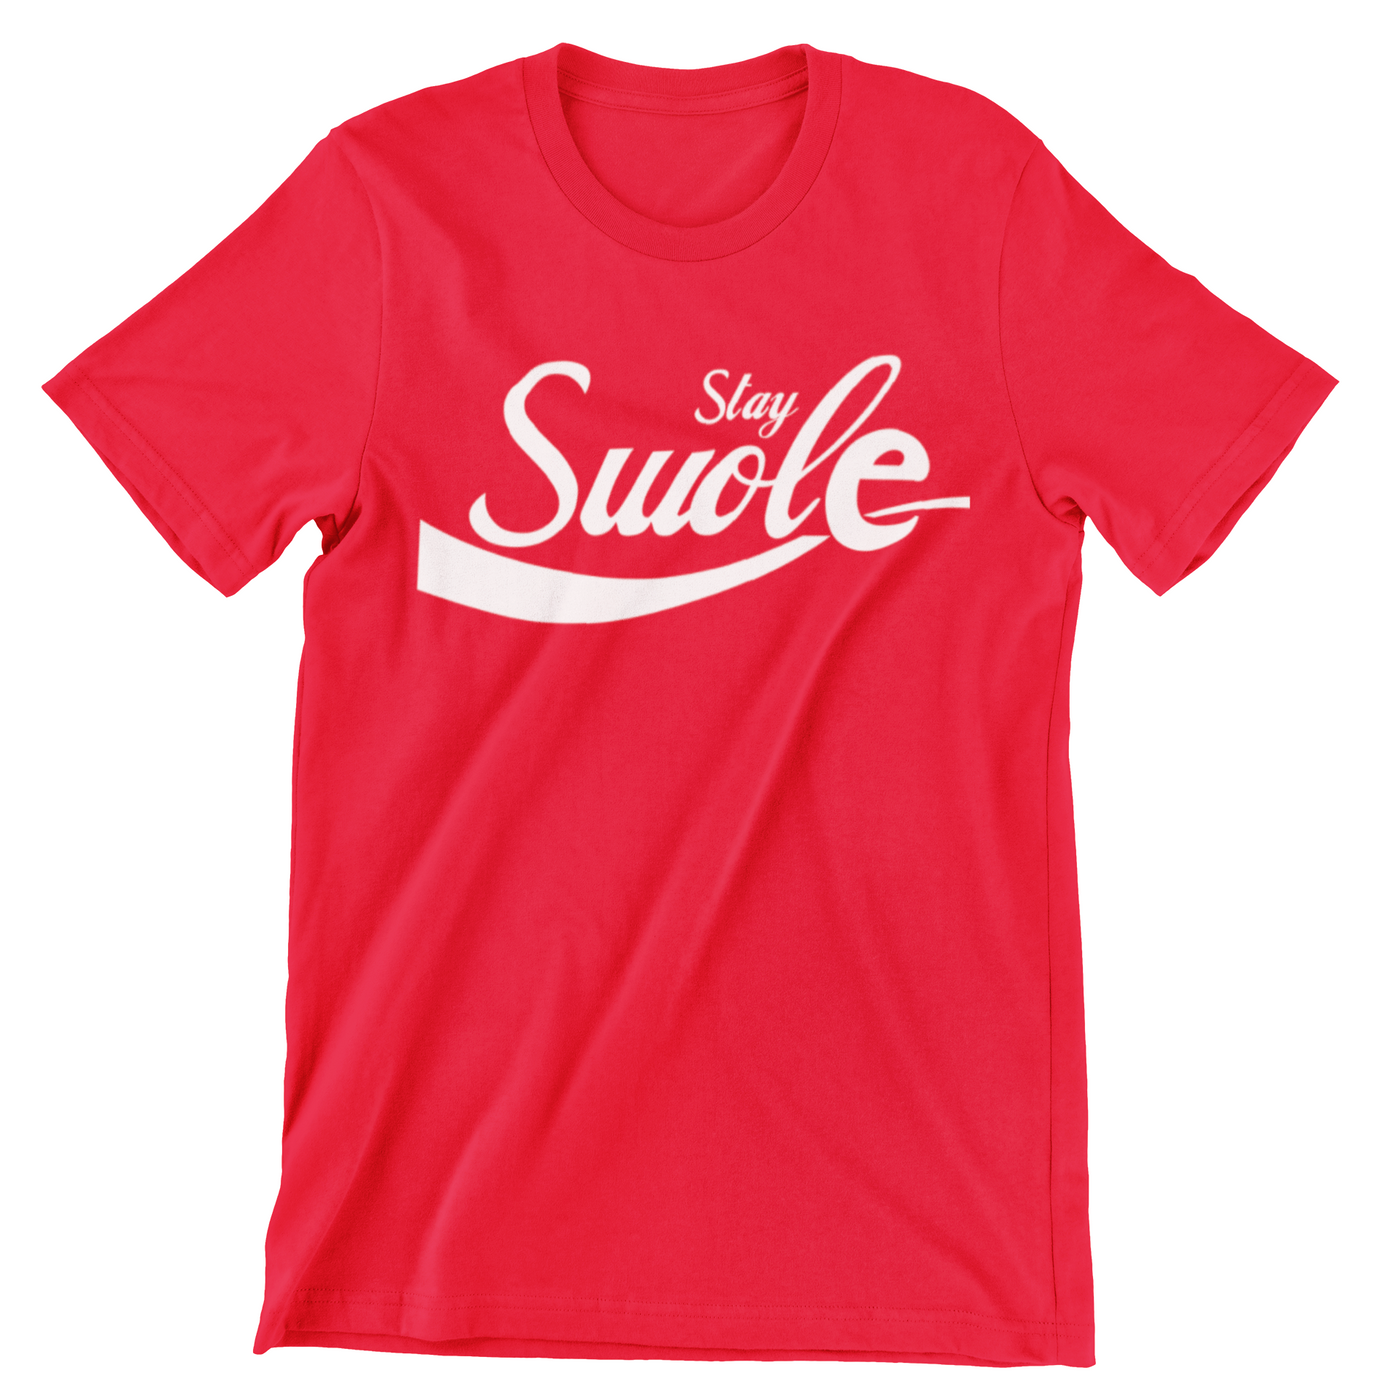 Stay Swole Shirt ( Limited Edition )